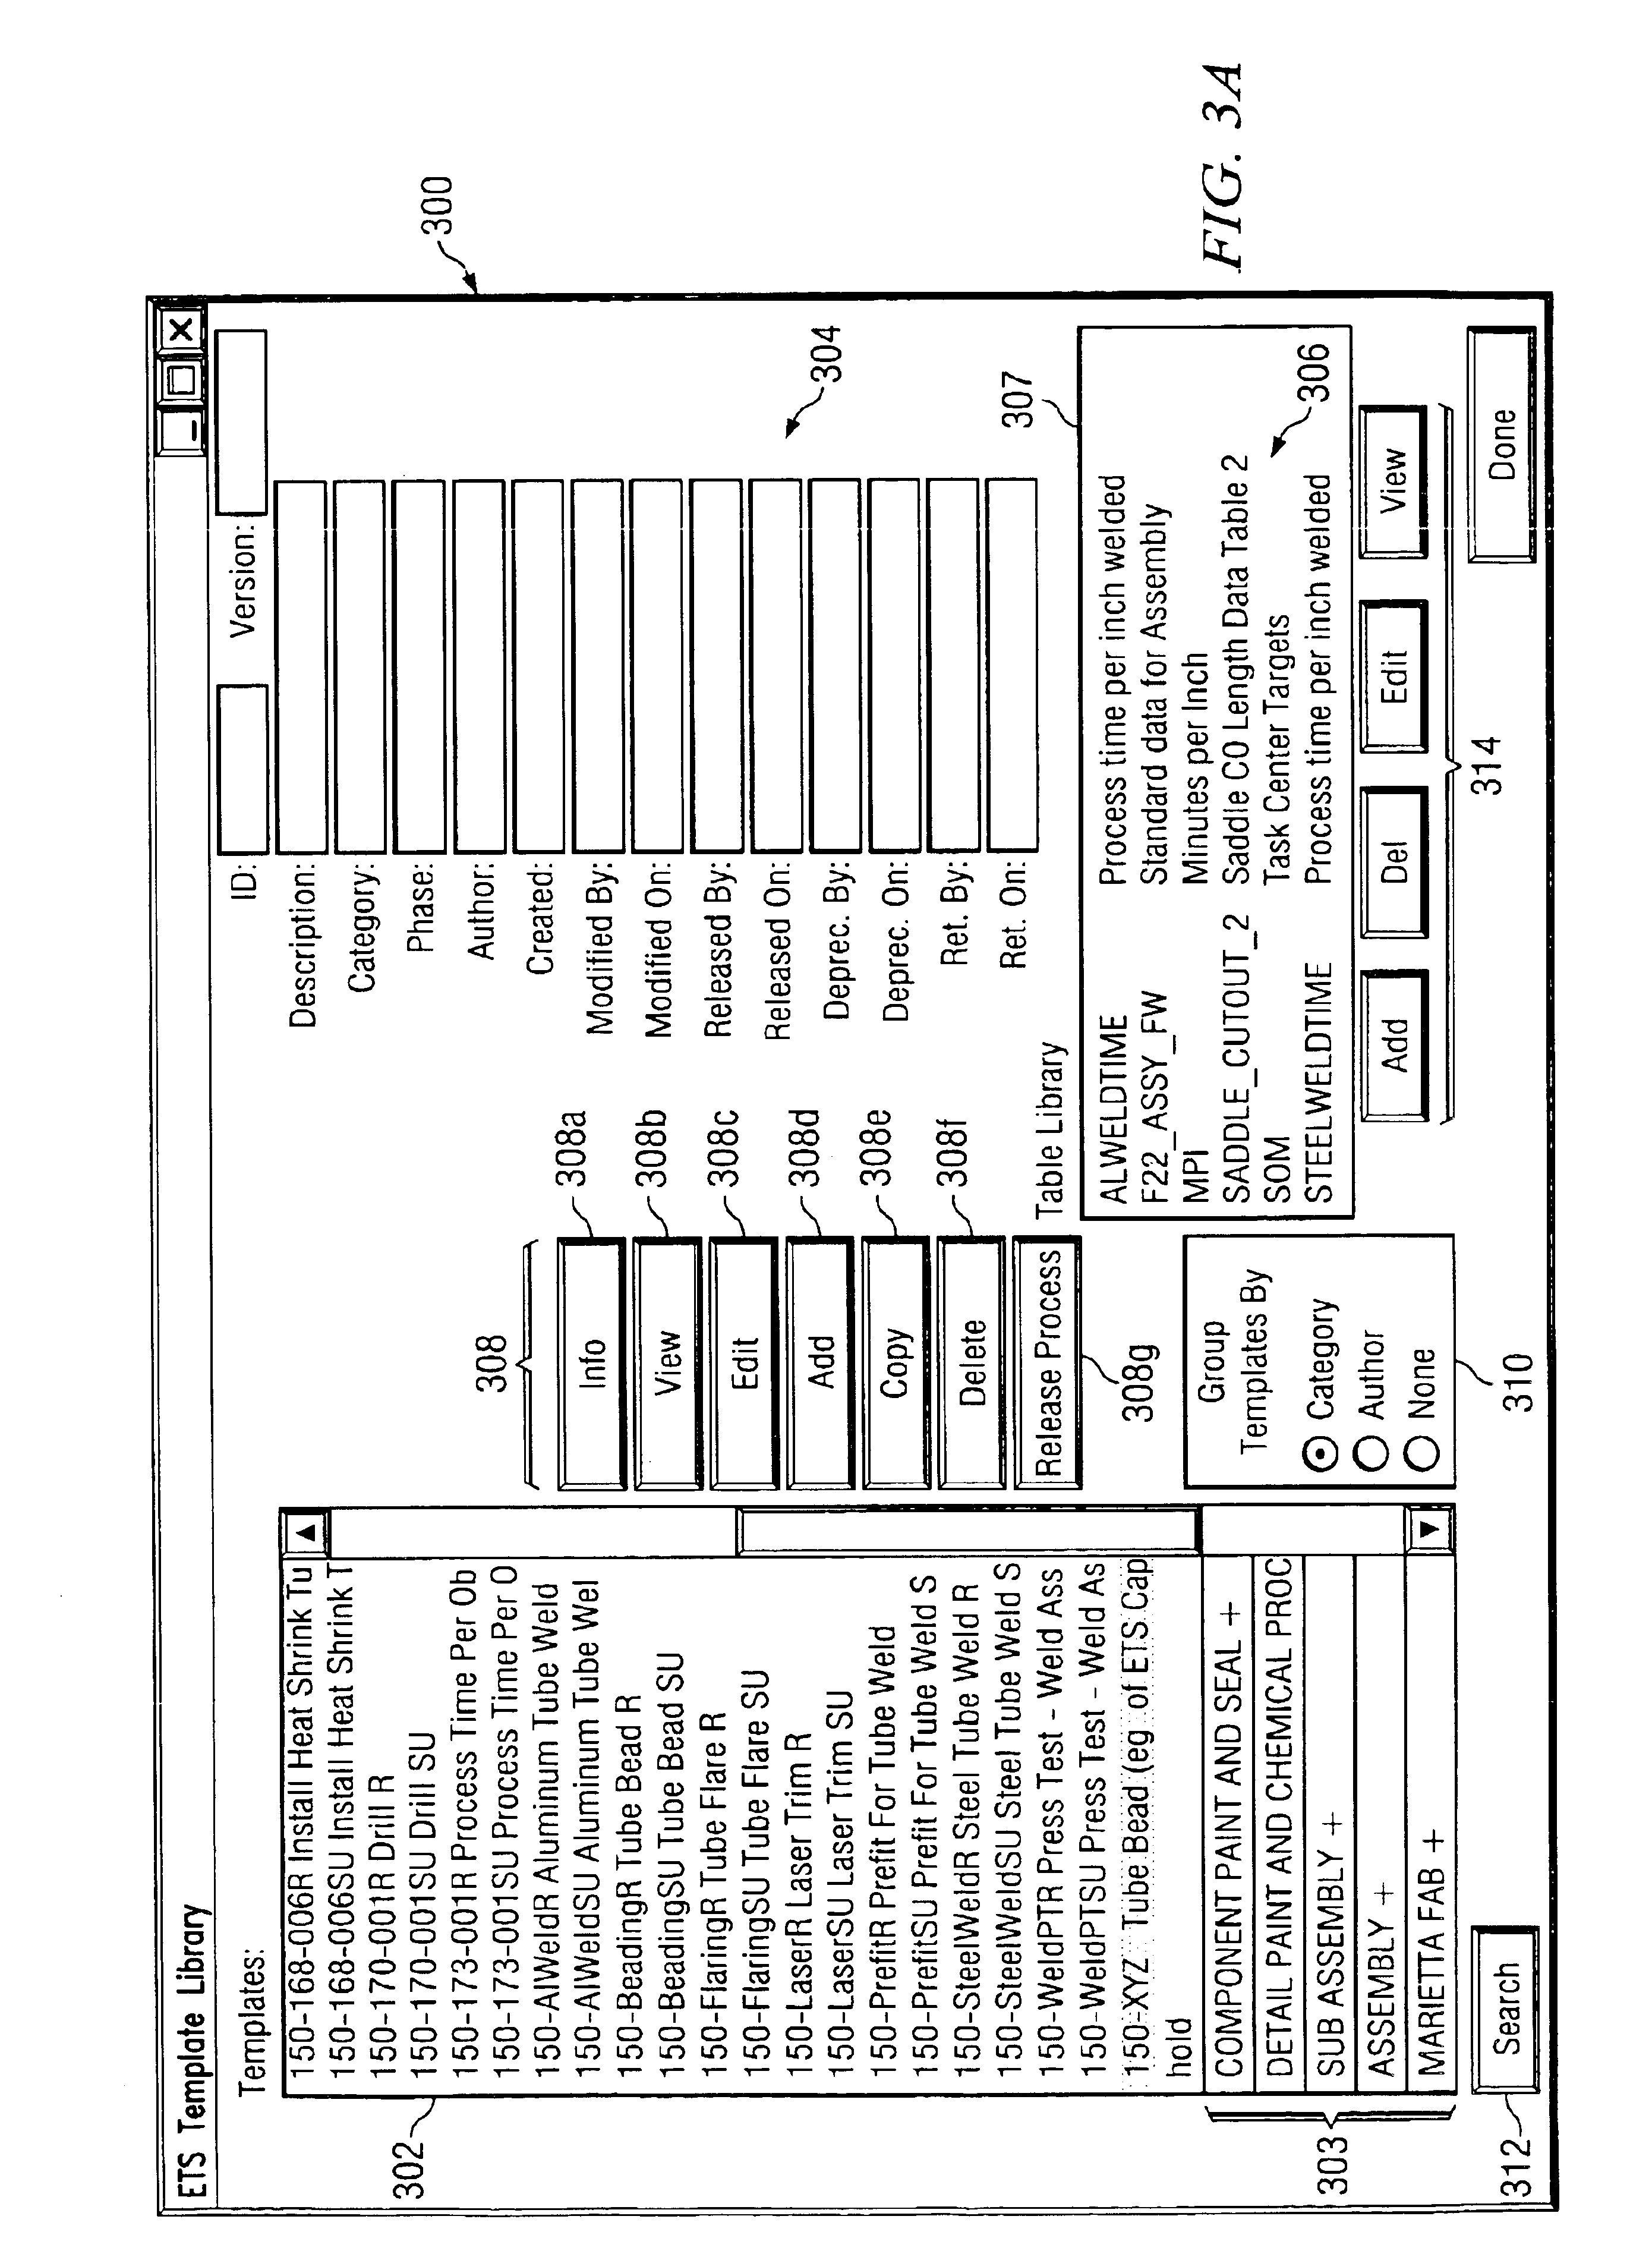 Method and system for creating and managing engineered time standards